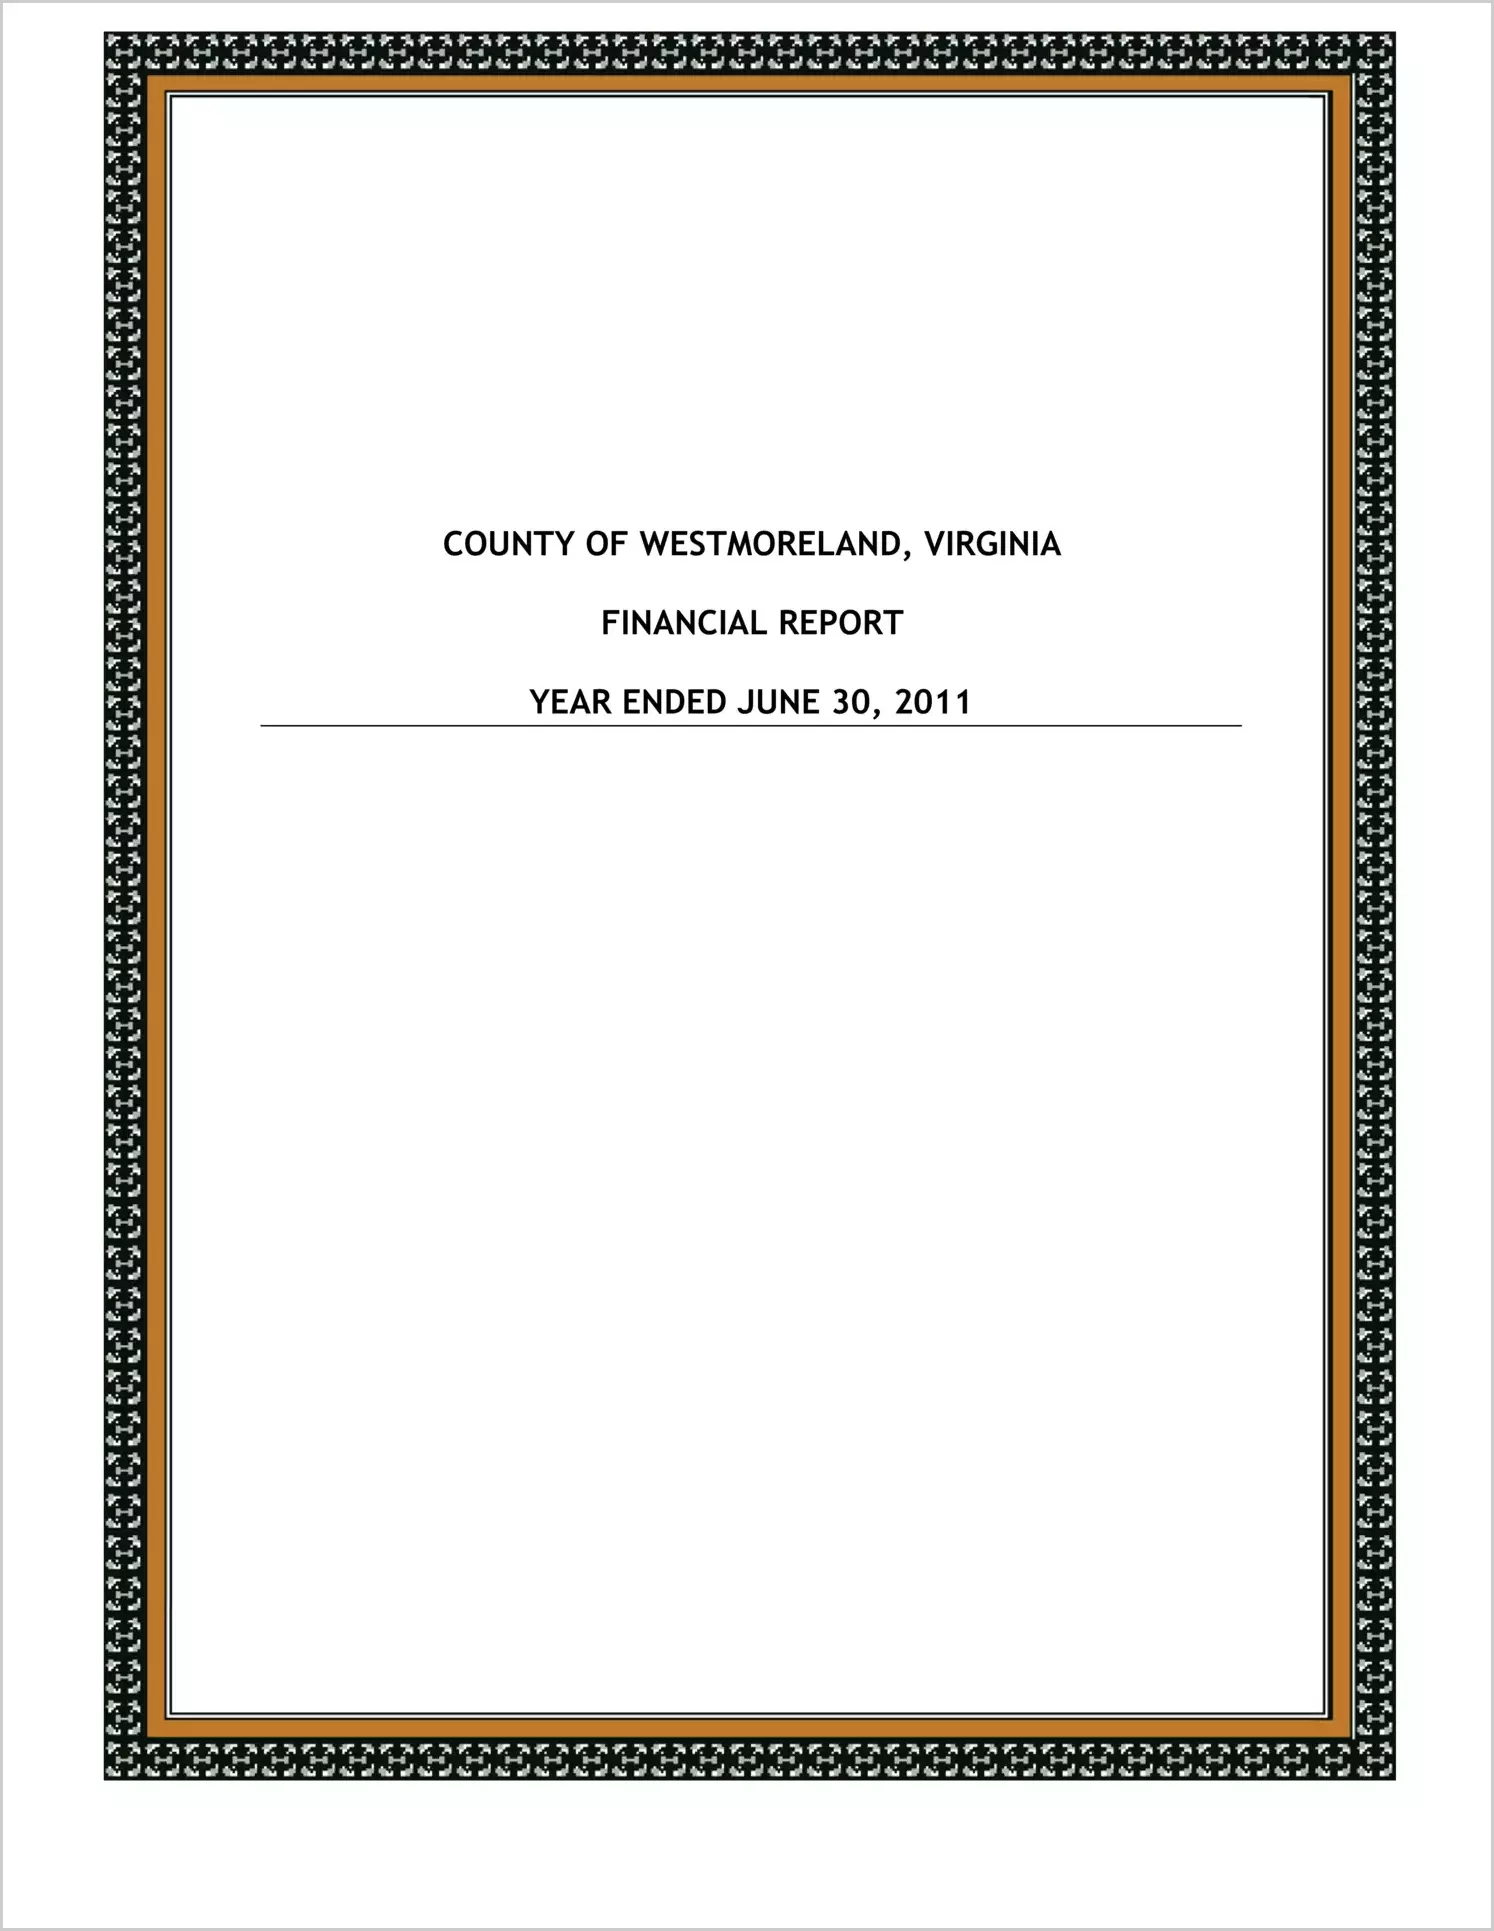 2011 Annual Financial Report for County of Westmoreland